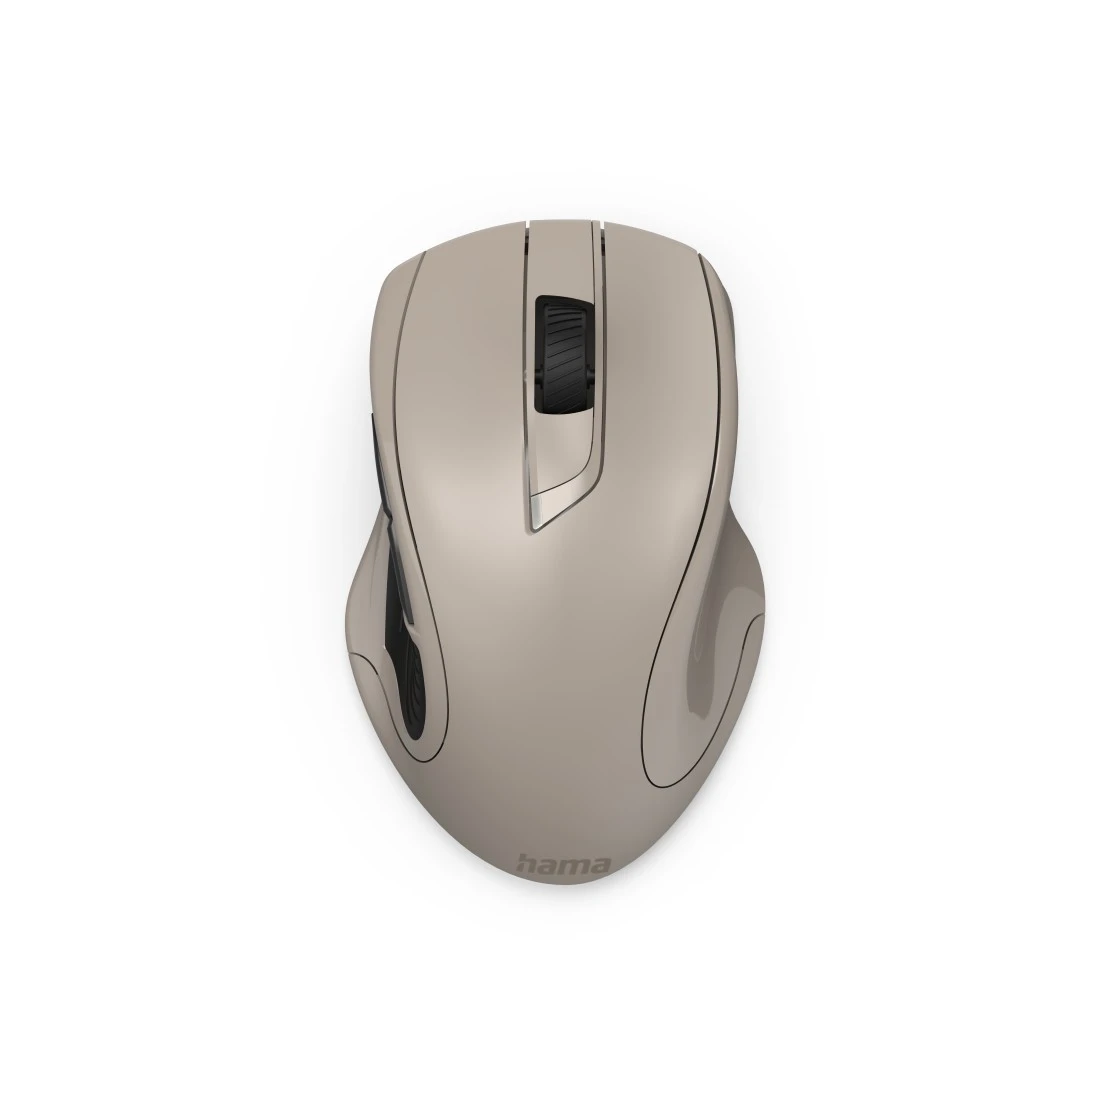 Hama 00173014 MW-800 V2 7-Button Laser Wireless Mouse, beige